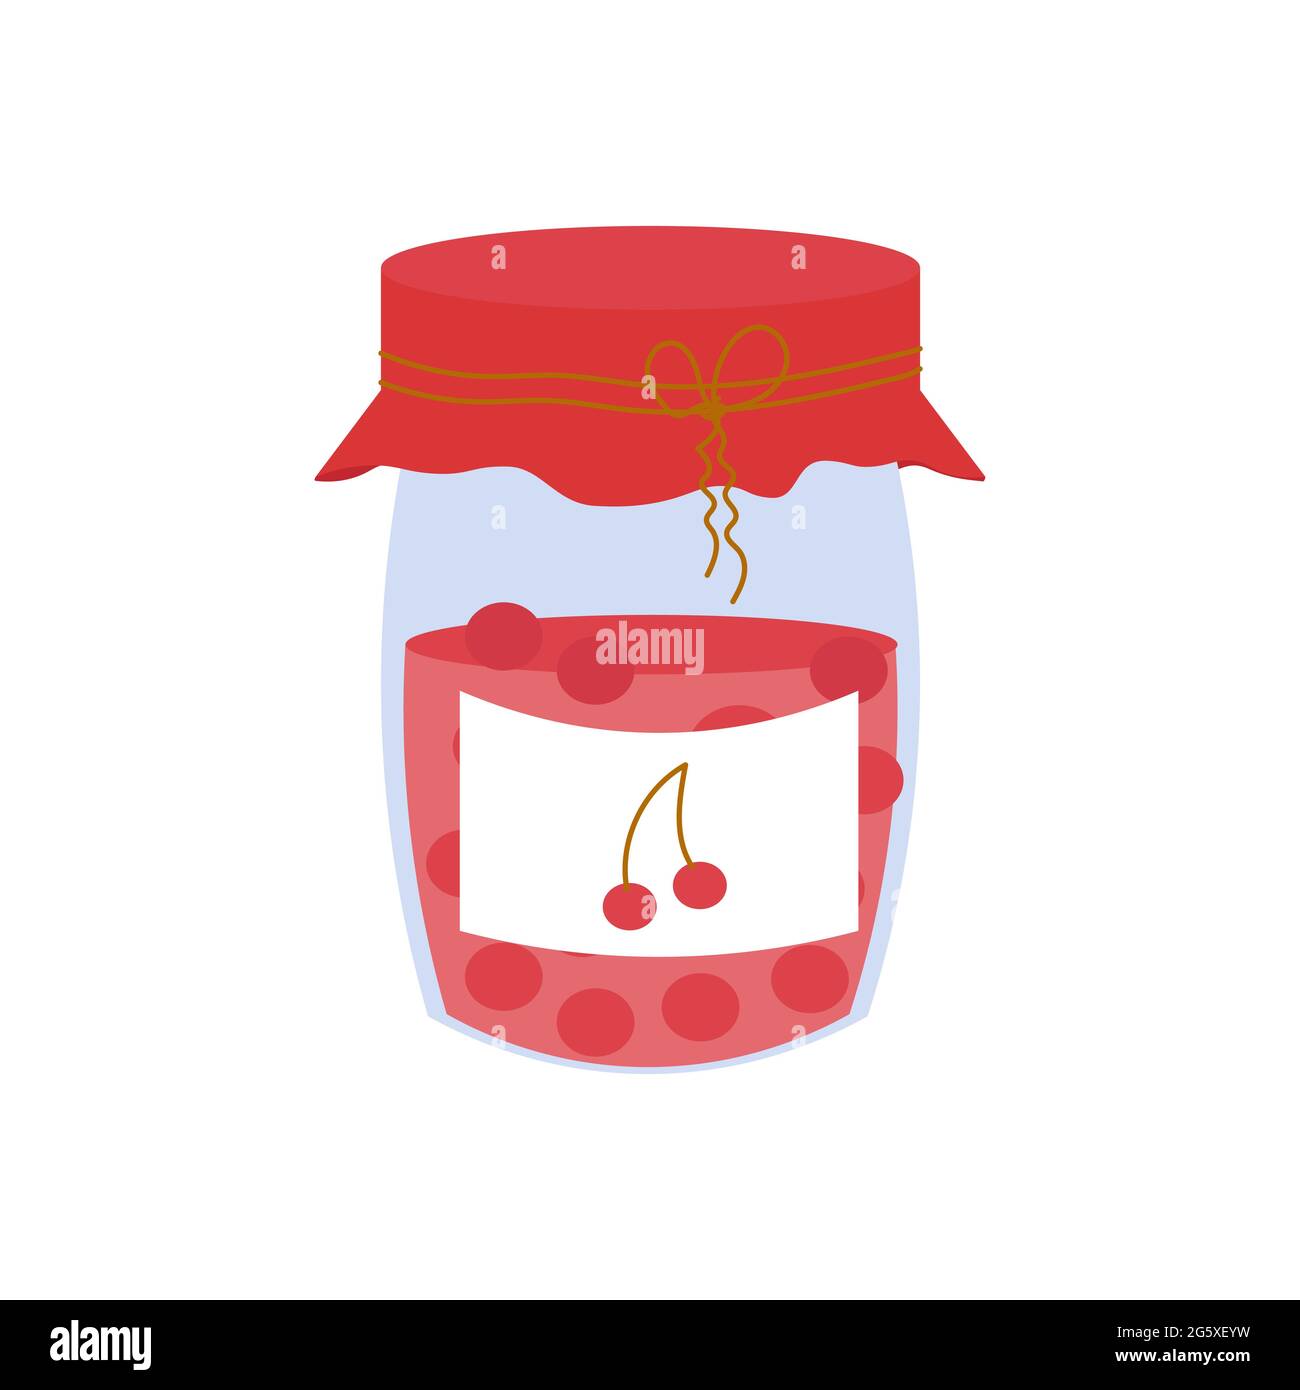 Jar with cherry jam, home made tasty dessert isolated on white background in doodle style stock vector illustration. Vector illustration Stock Vector